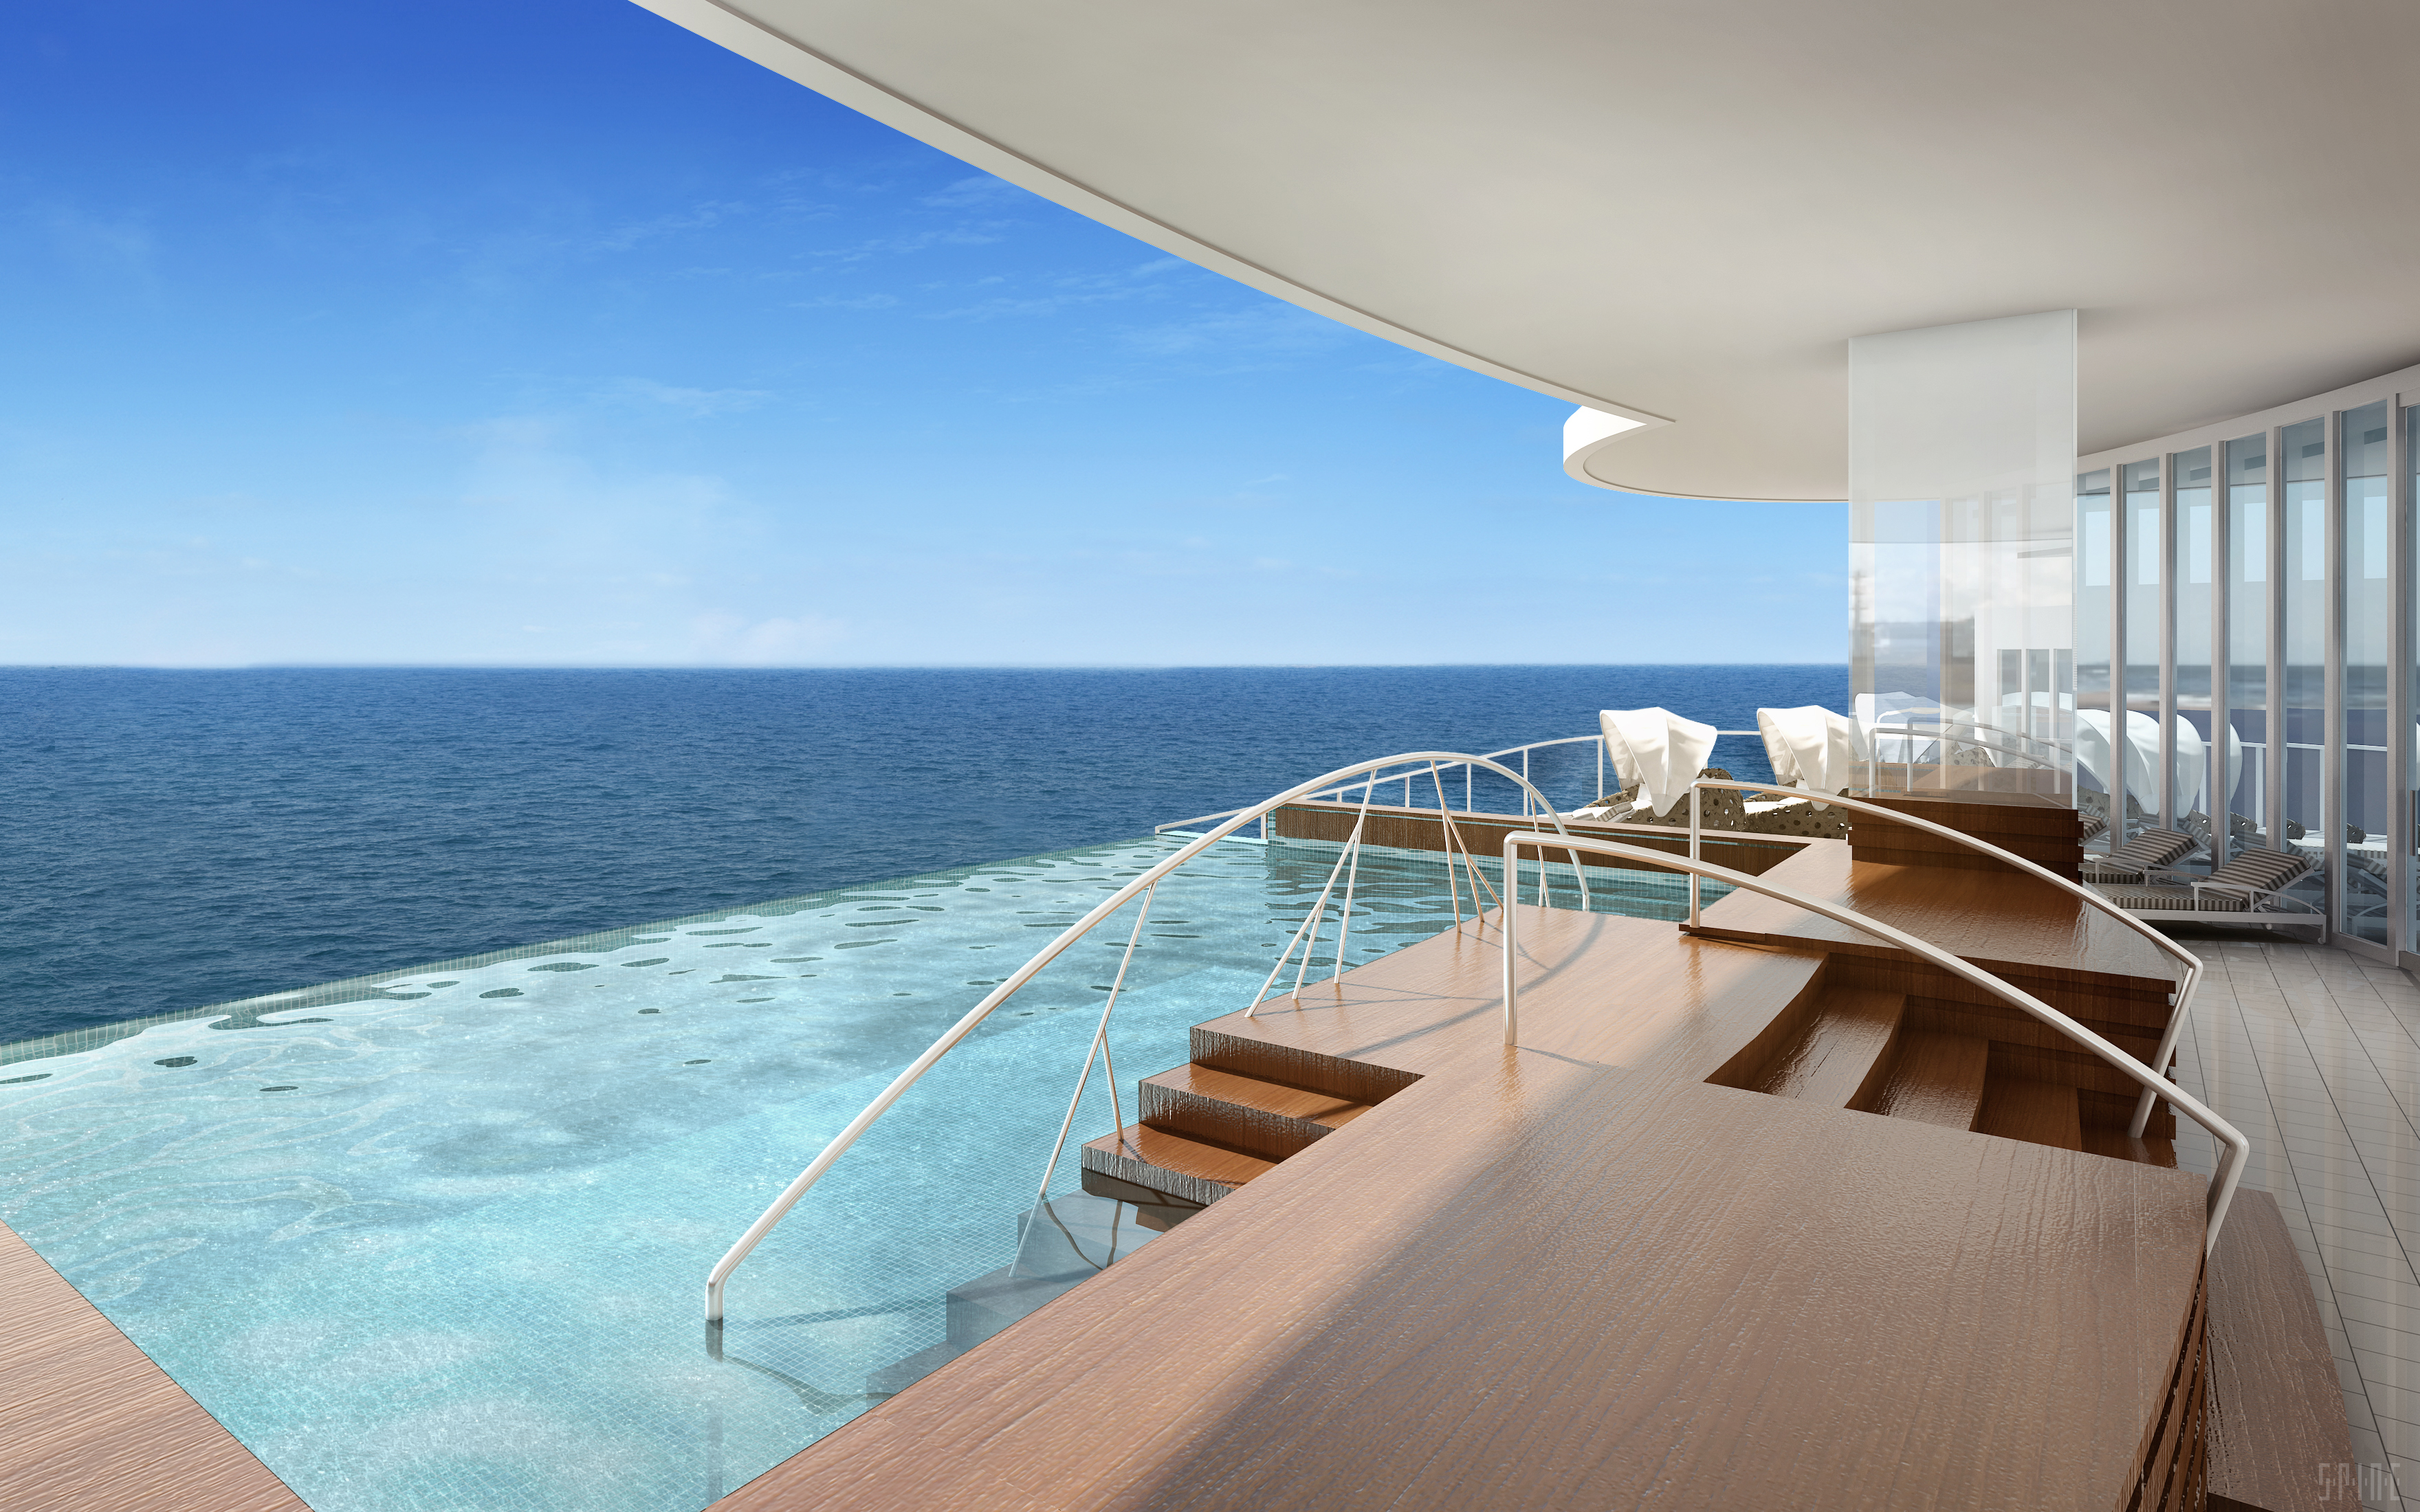 Sea view from the Regent Suite - picture by Norvegian Cruise Line